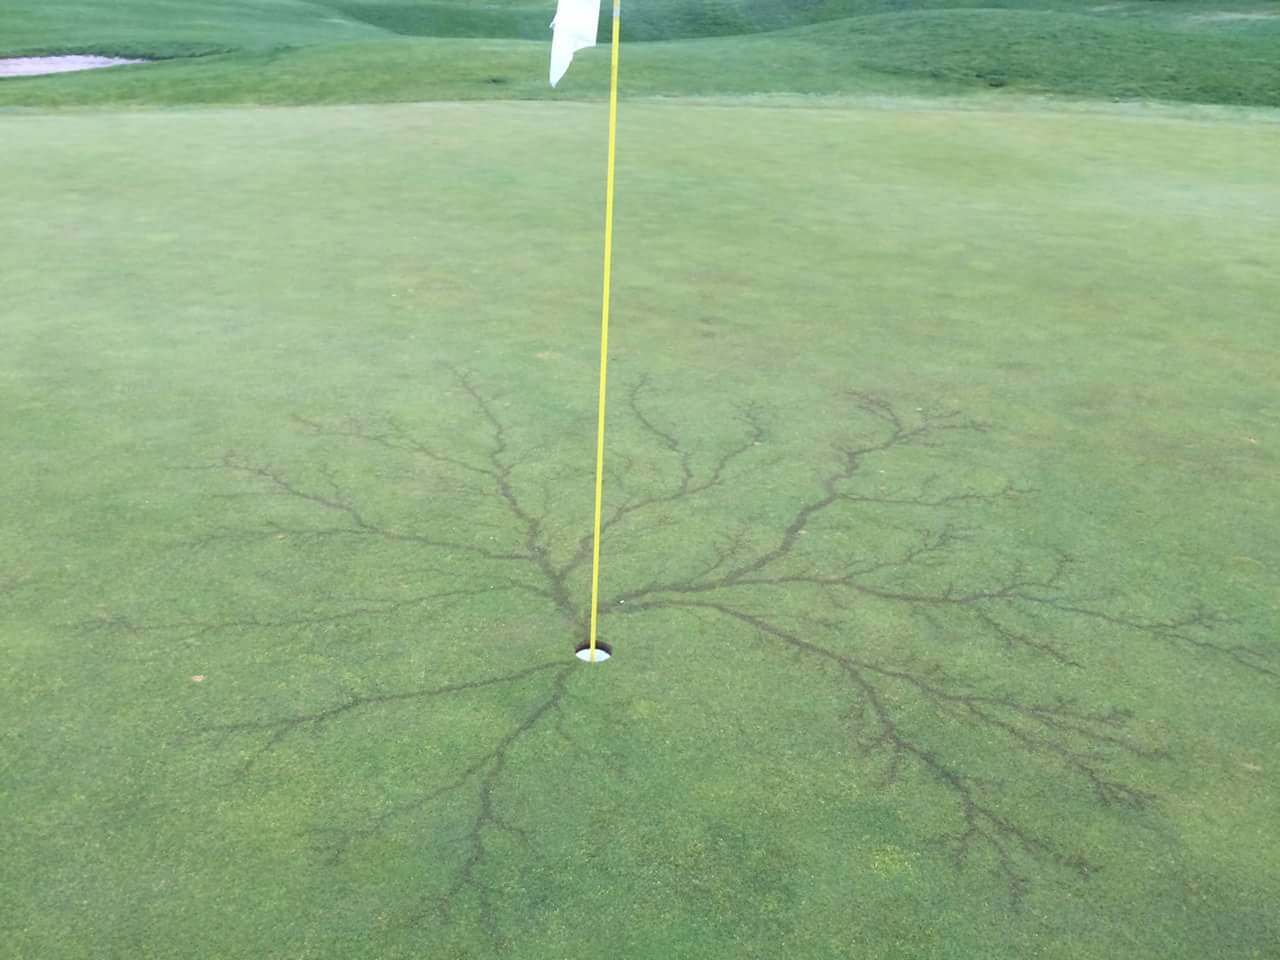 This flagstick at a golf course in Utah got hit by lightning